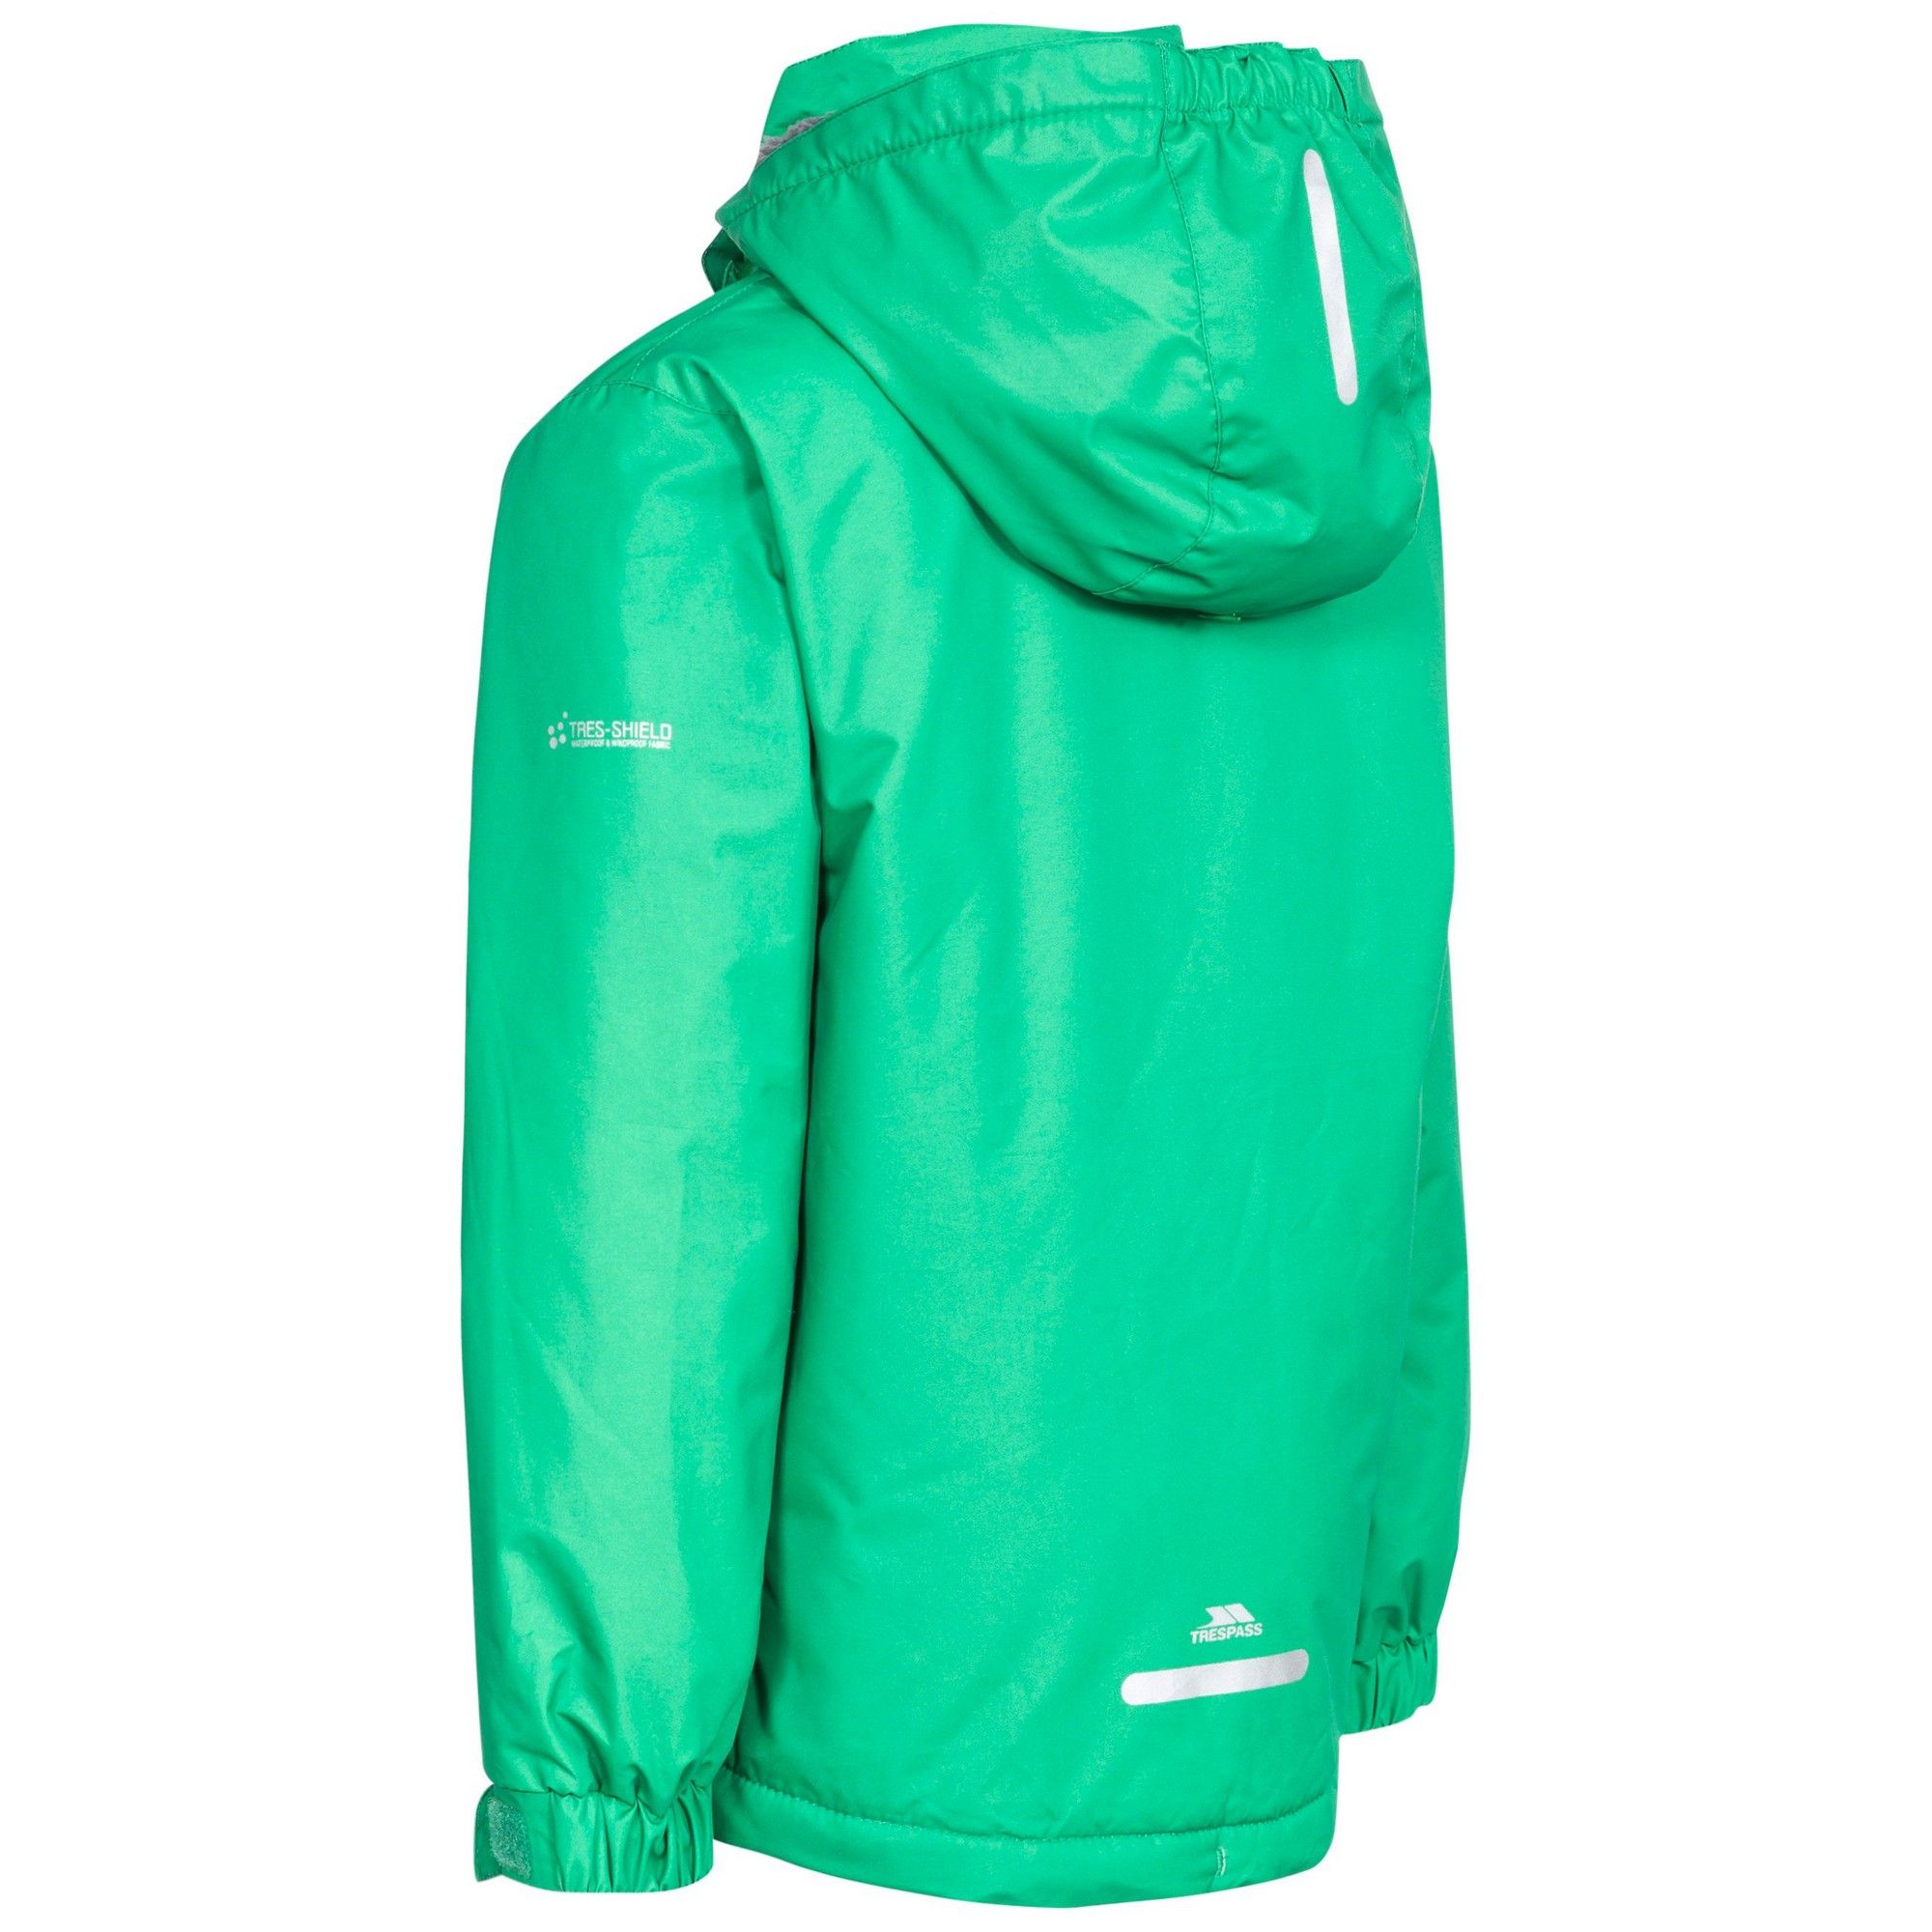 Padded. Detachable stud off hood. Sherpa fleece lined hood. 2 zip pockets. Elasticated cuff with touch fastening tab. Hem drawcord. Contrast front zip. Reflective stripe on back. Waterproof 3000mm, windproof, taped seams. Shell: 100% Polyester, PU coating, Lining: 100% Polyester, Filling: 100% Polyester. Trespass Childrens Chest Sizing (approx): 2/3 Years - 21in/53cm, 3/4 Years - 22in/56cm, 5/6 Years - 24in/61cm, 7/8 Years - 26in/66cm, 9/10 Years - 28in/71cm, 11/12 Years - 31in/79cm.